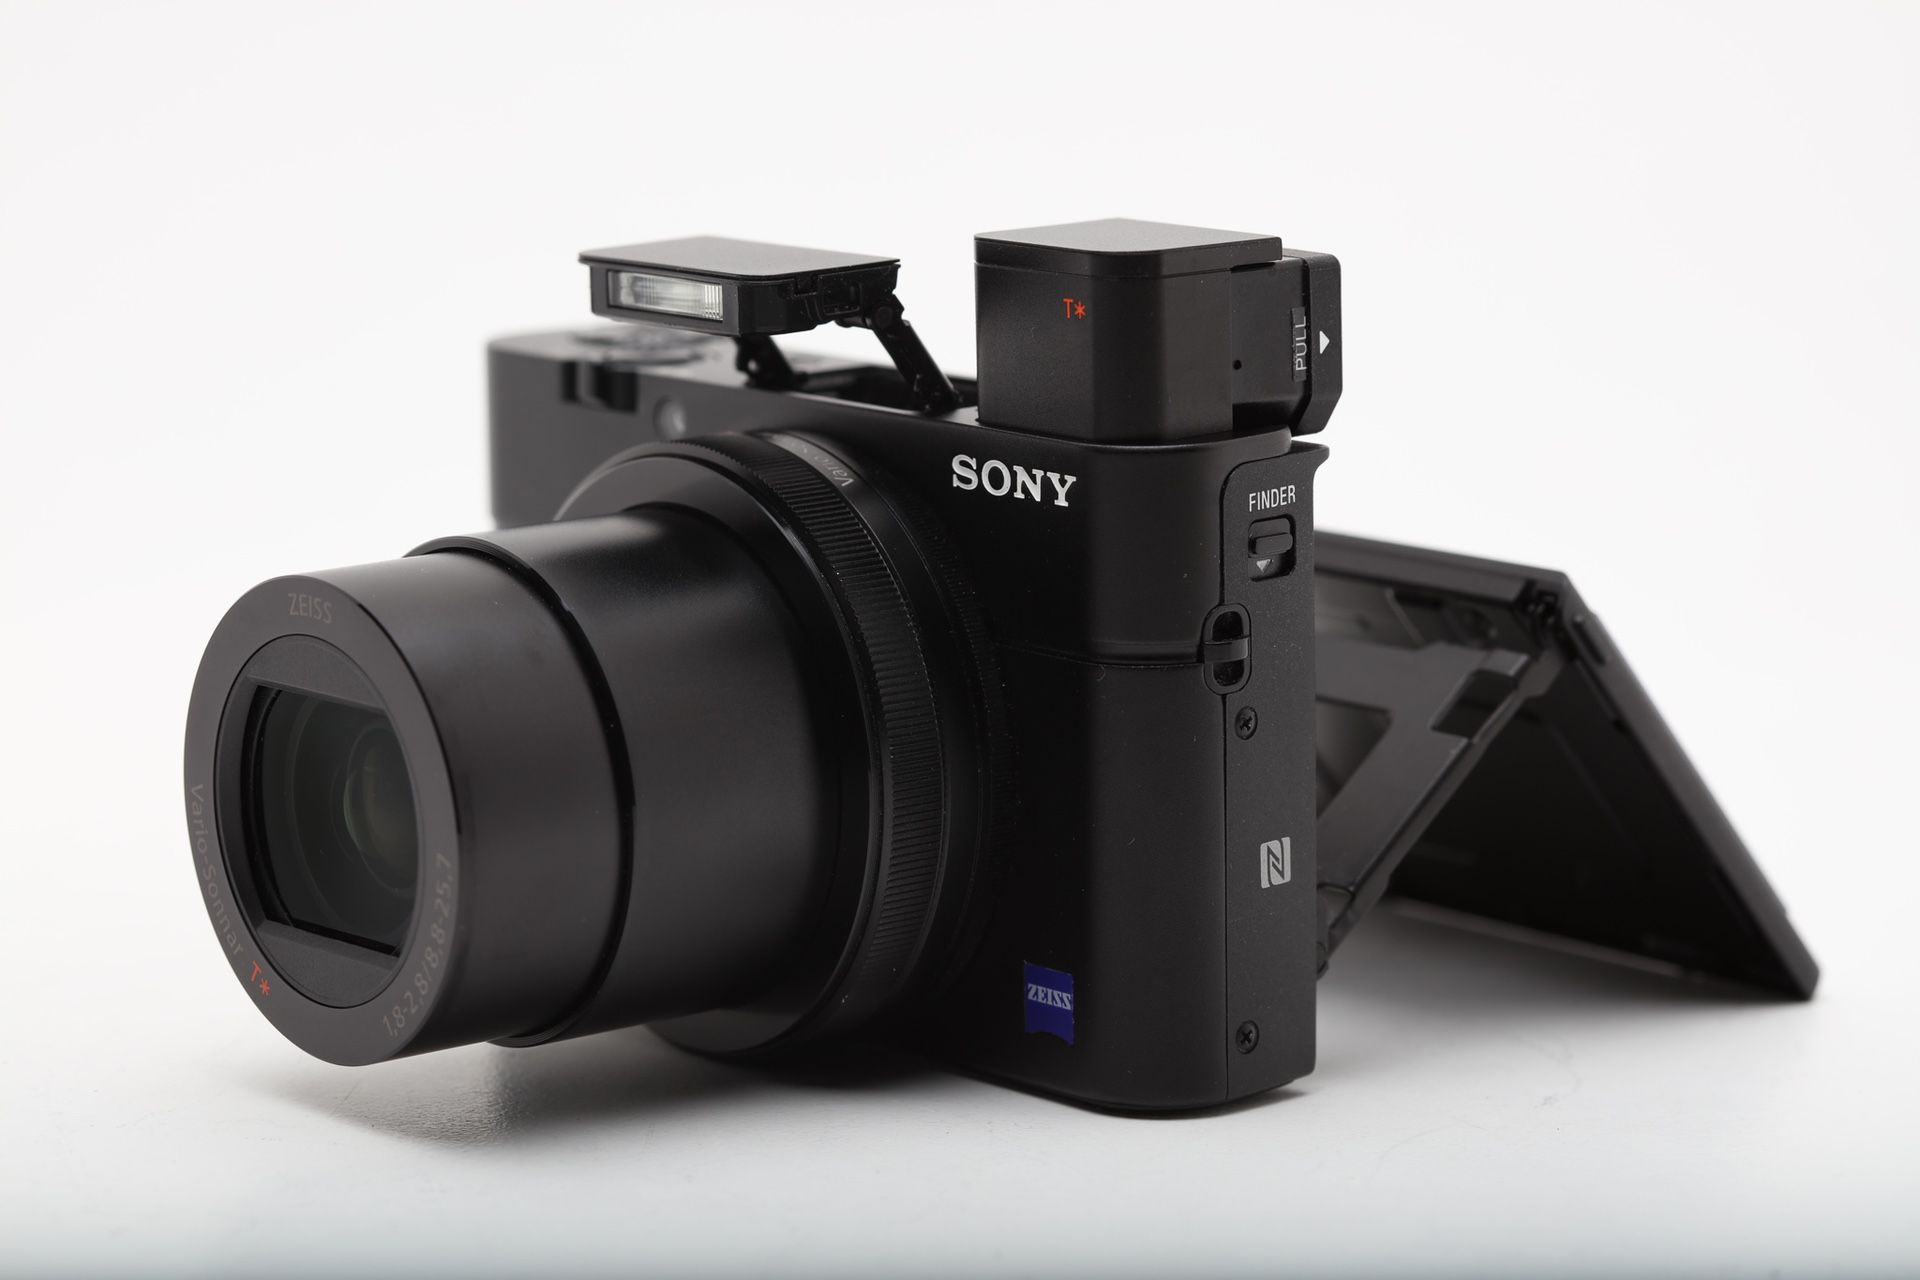 Sony RX100 III | Mint condition LNIB with extra battery and neoprene carrying case